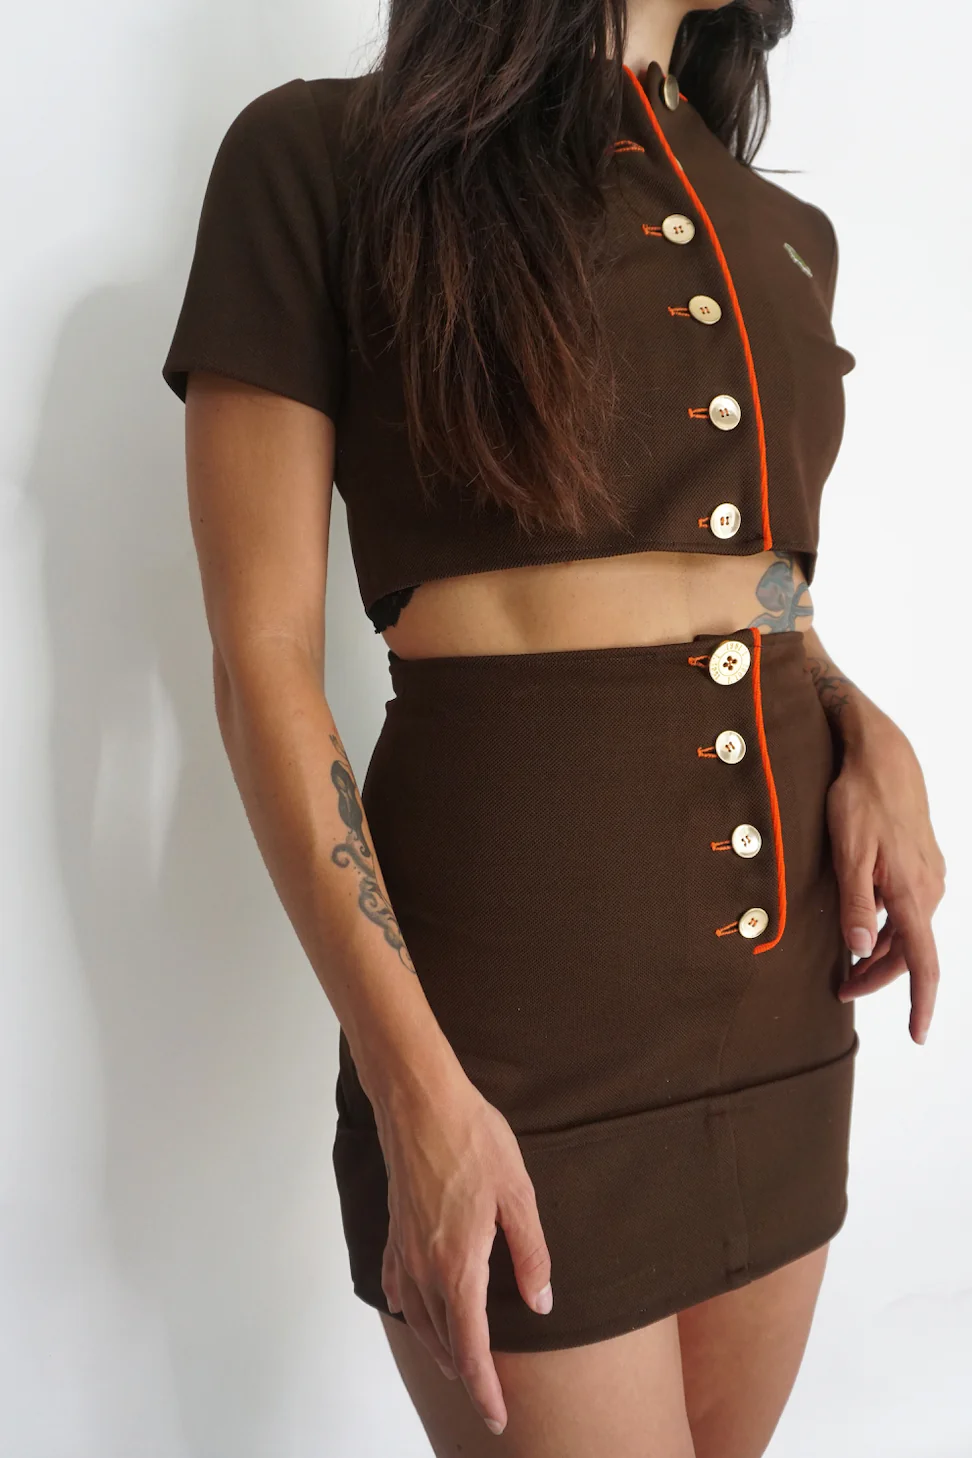 A woman wearing the Vintage 2 Piece Crop Top and Mini Skirt Set.